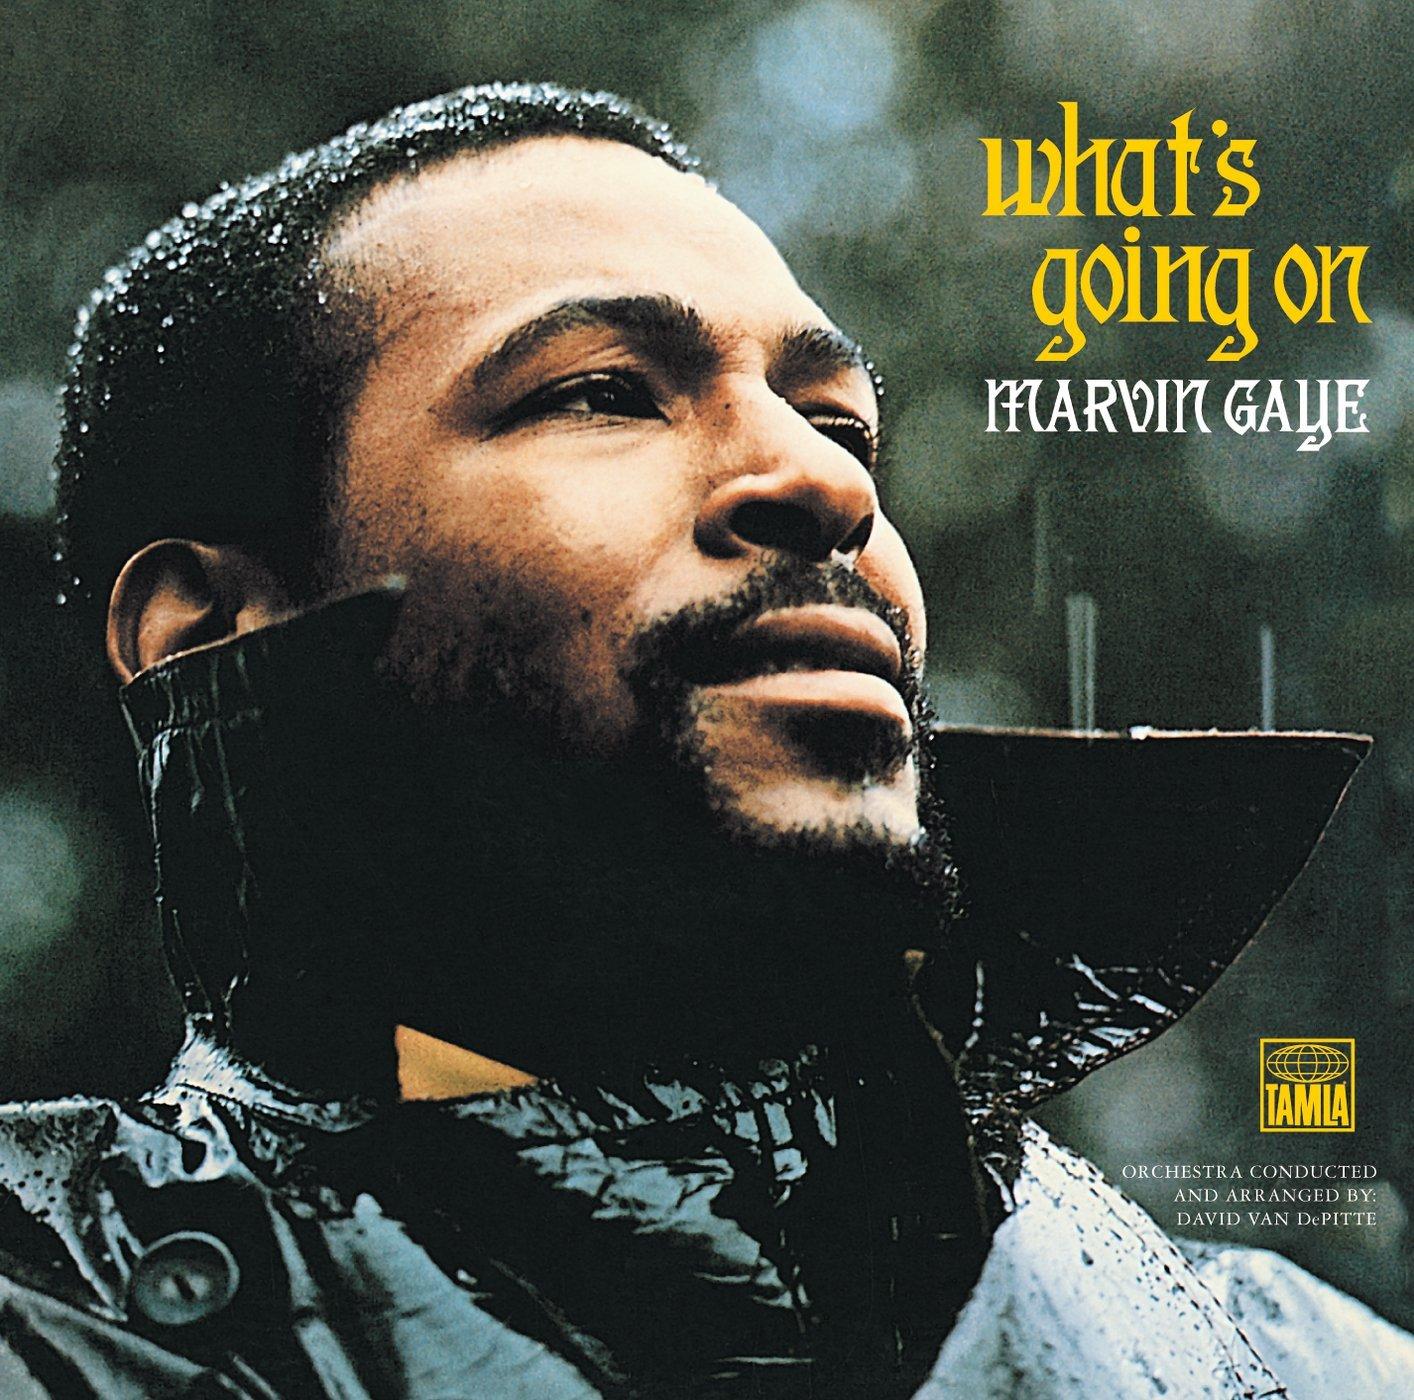 Marvin Gayes ”What’s going on”.